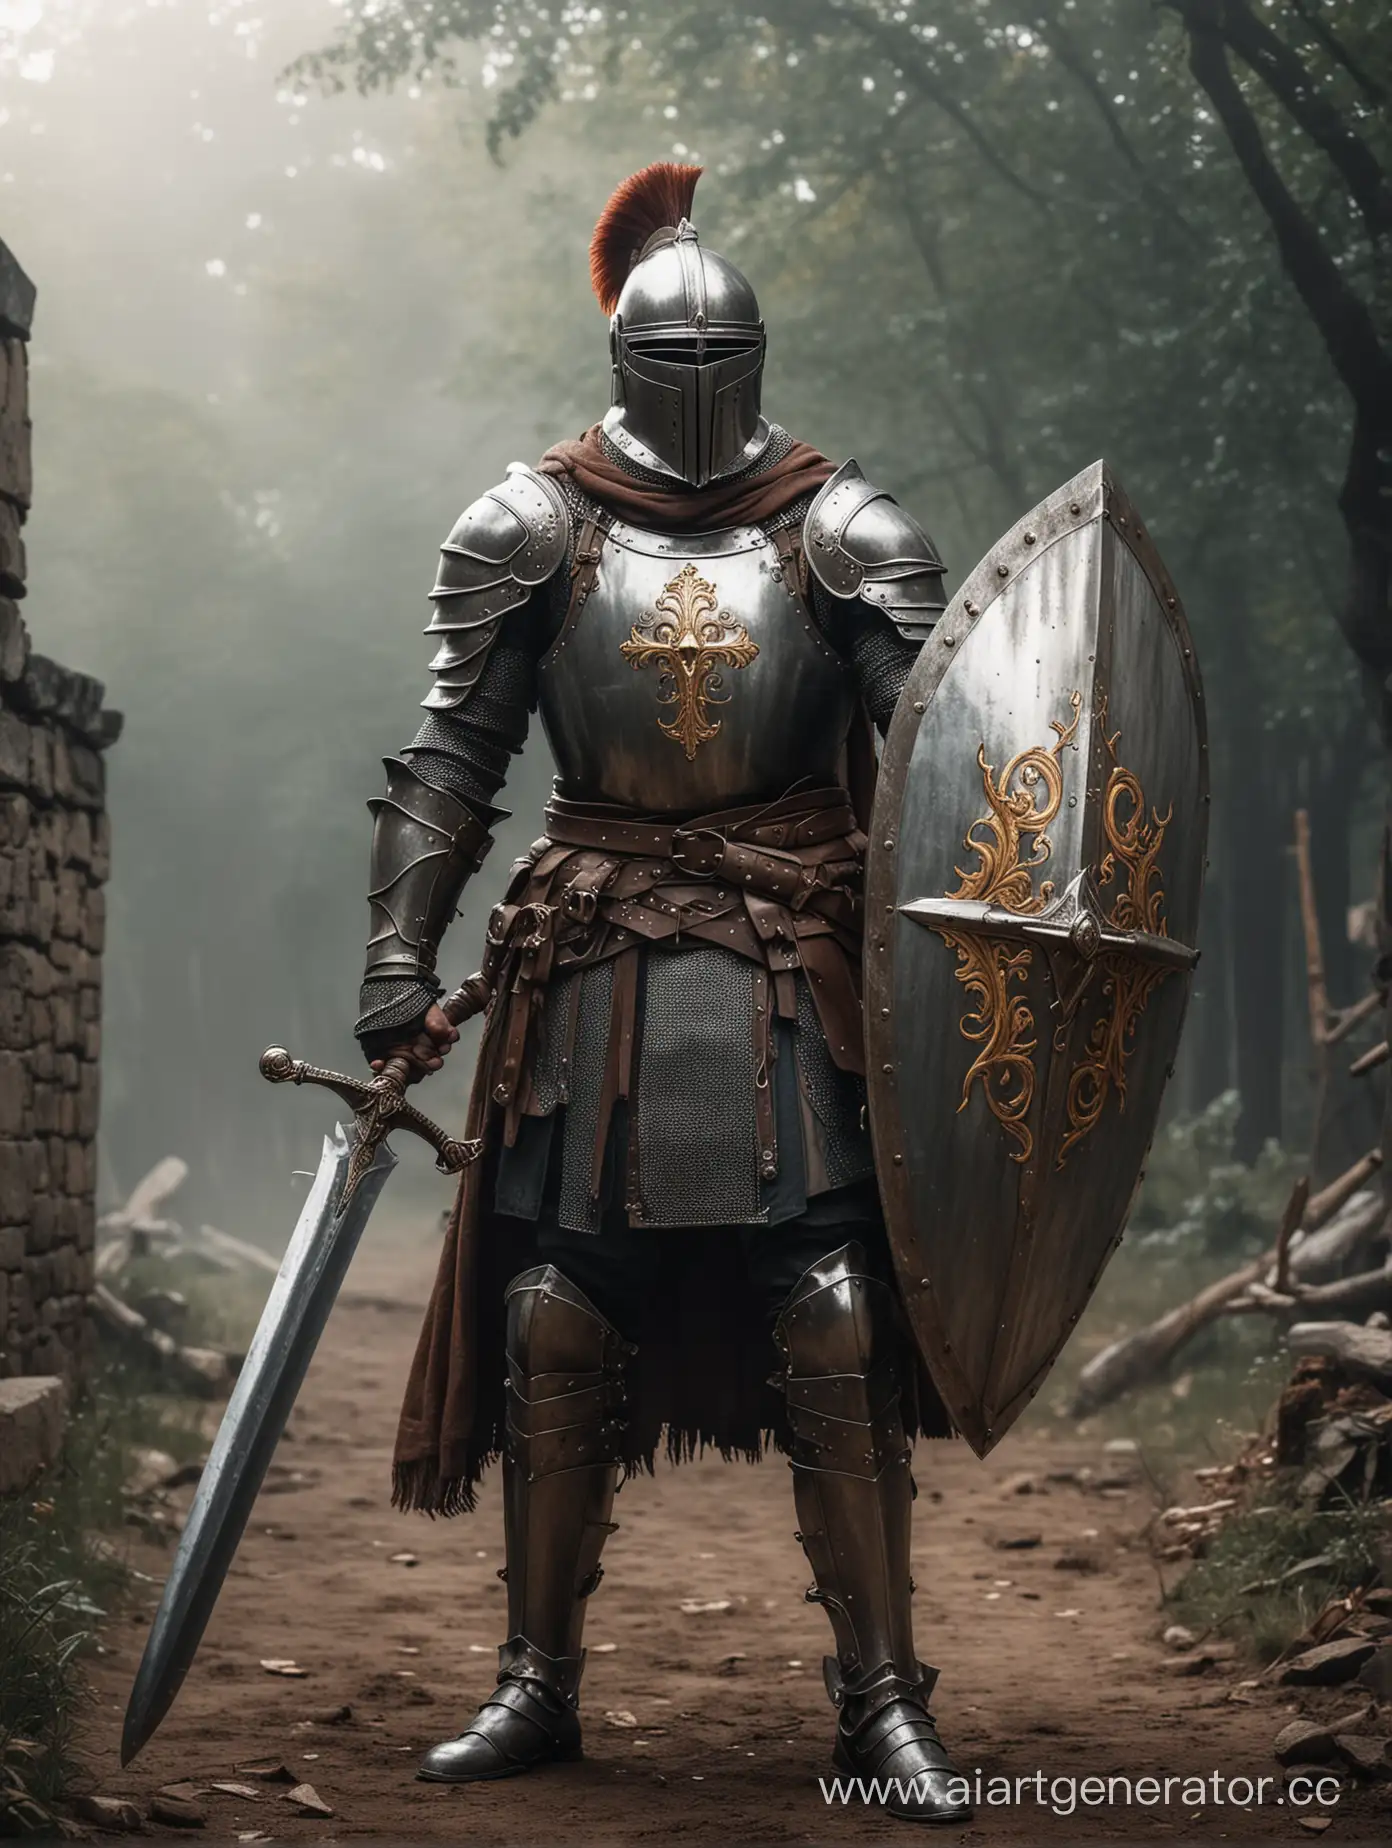 Medieval-Knight-in-Armor-with-Scimitar-and-Shield